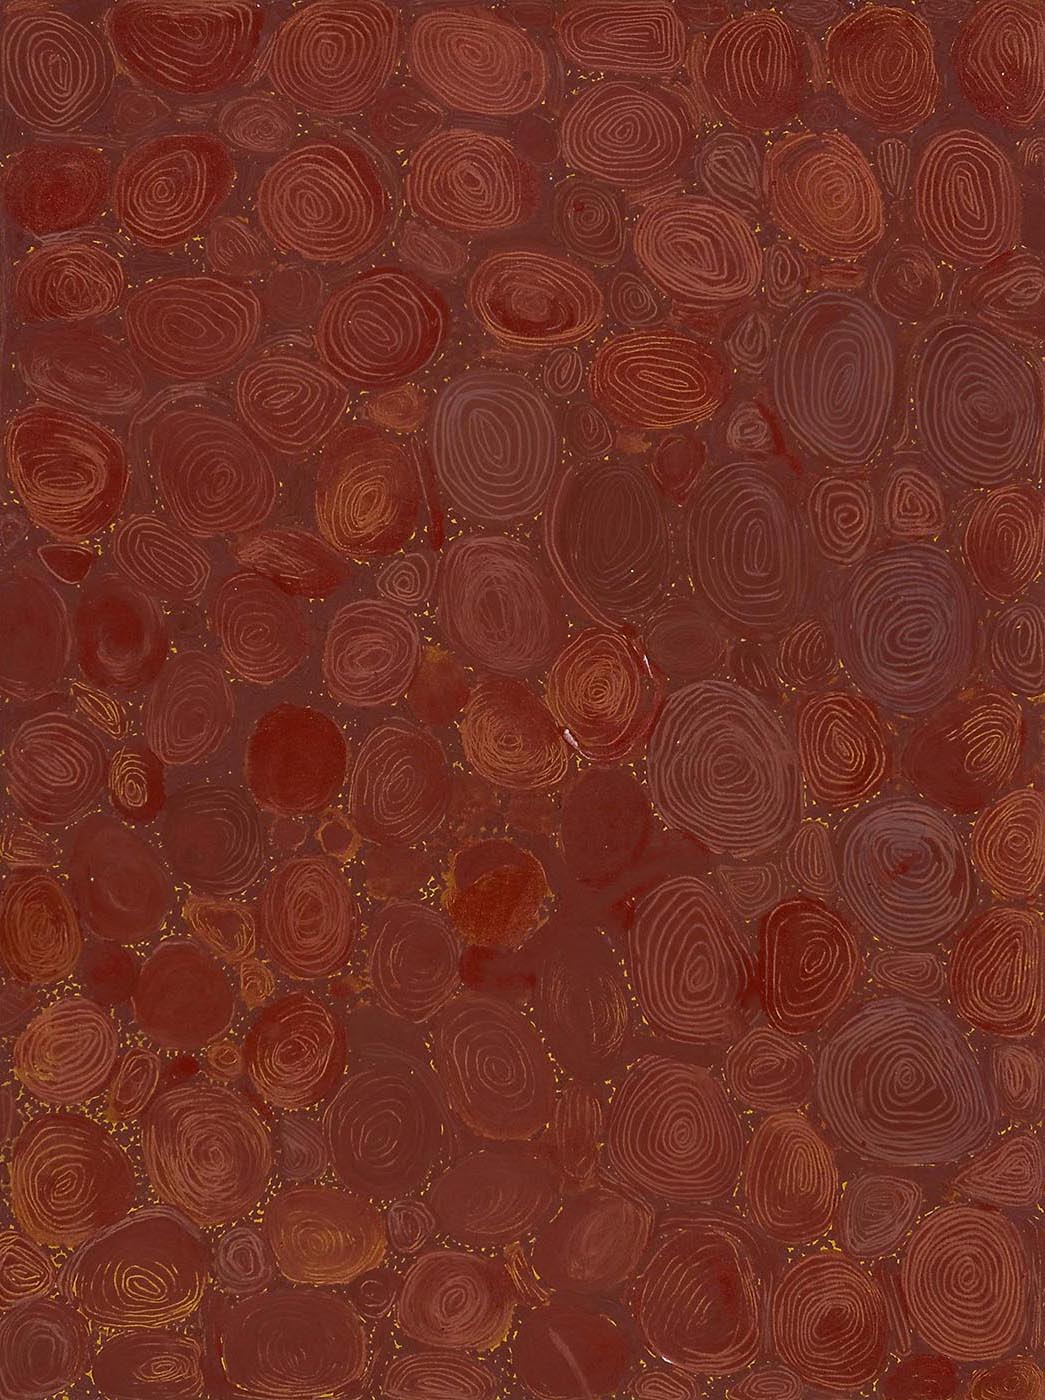 A textured chocolate brown toned painting on canvas with a design of concentric ovals which have been scribed with a blunt instrument into the layer of paint. In the small spaces between the ovals are raised dots in brown. - click to view larger image